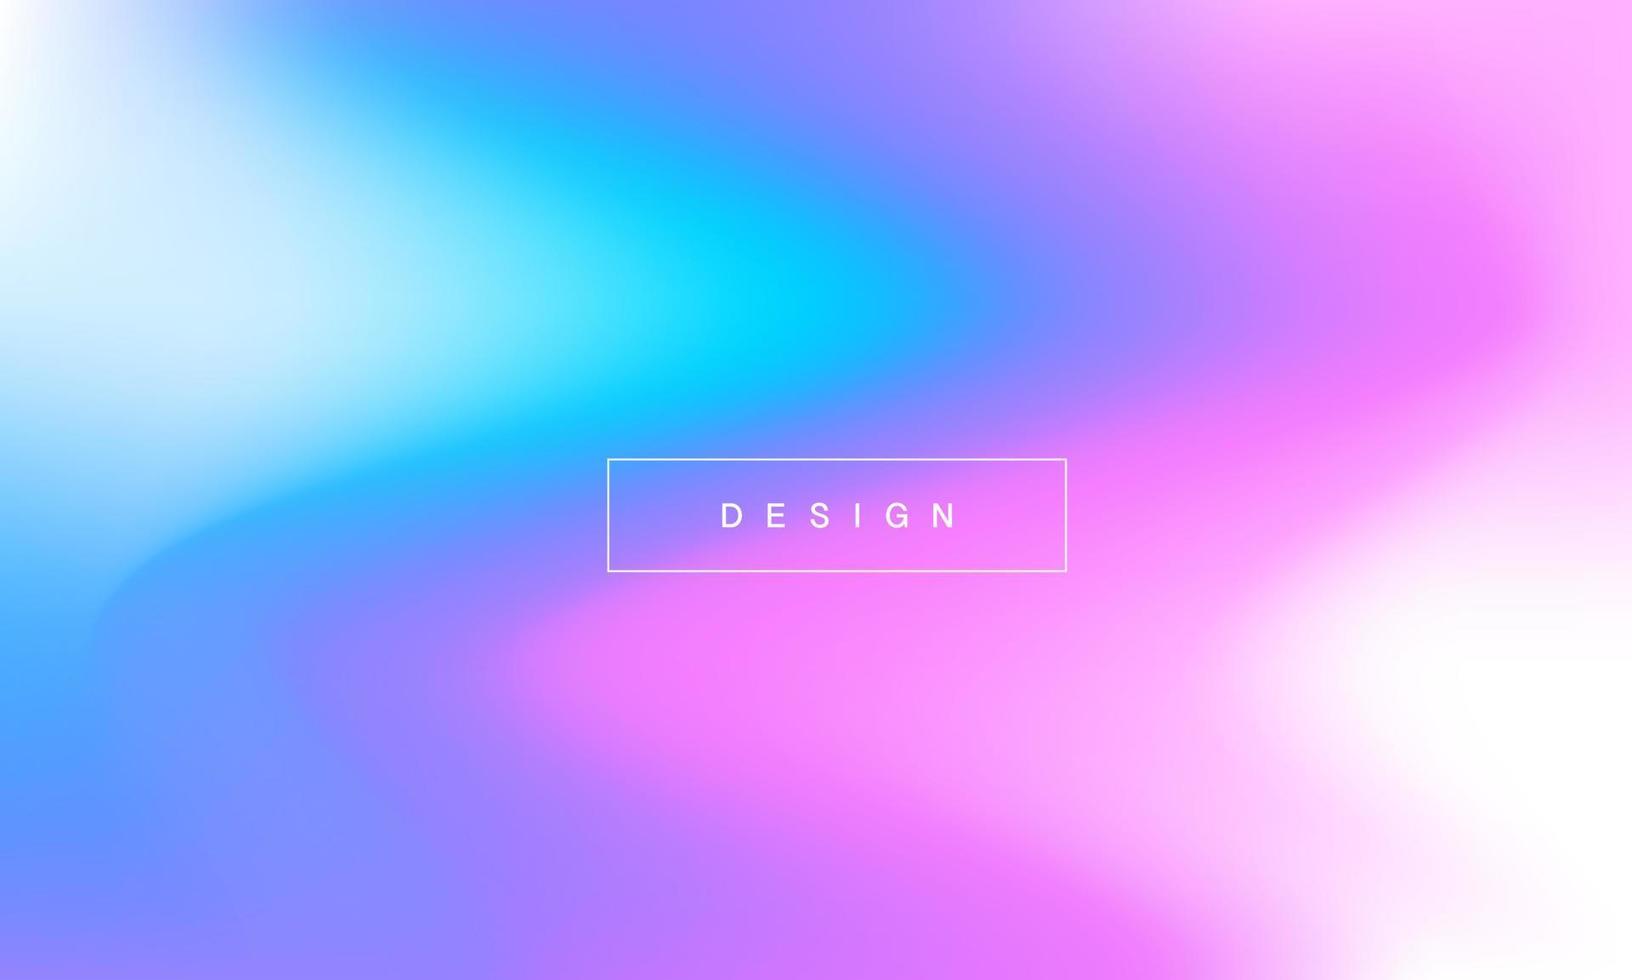 Pastel abstract gradient backgrounds. soft tender pink, blue, purple and orange gradients for app, web design, webpages, banners, greeting cards. vector illustration design